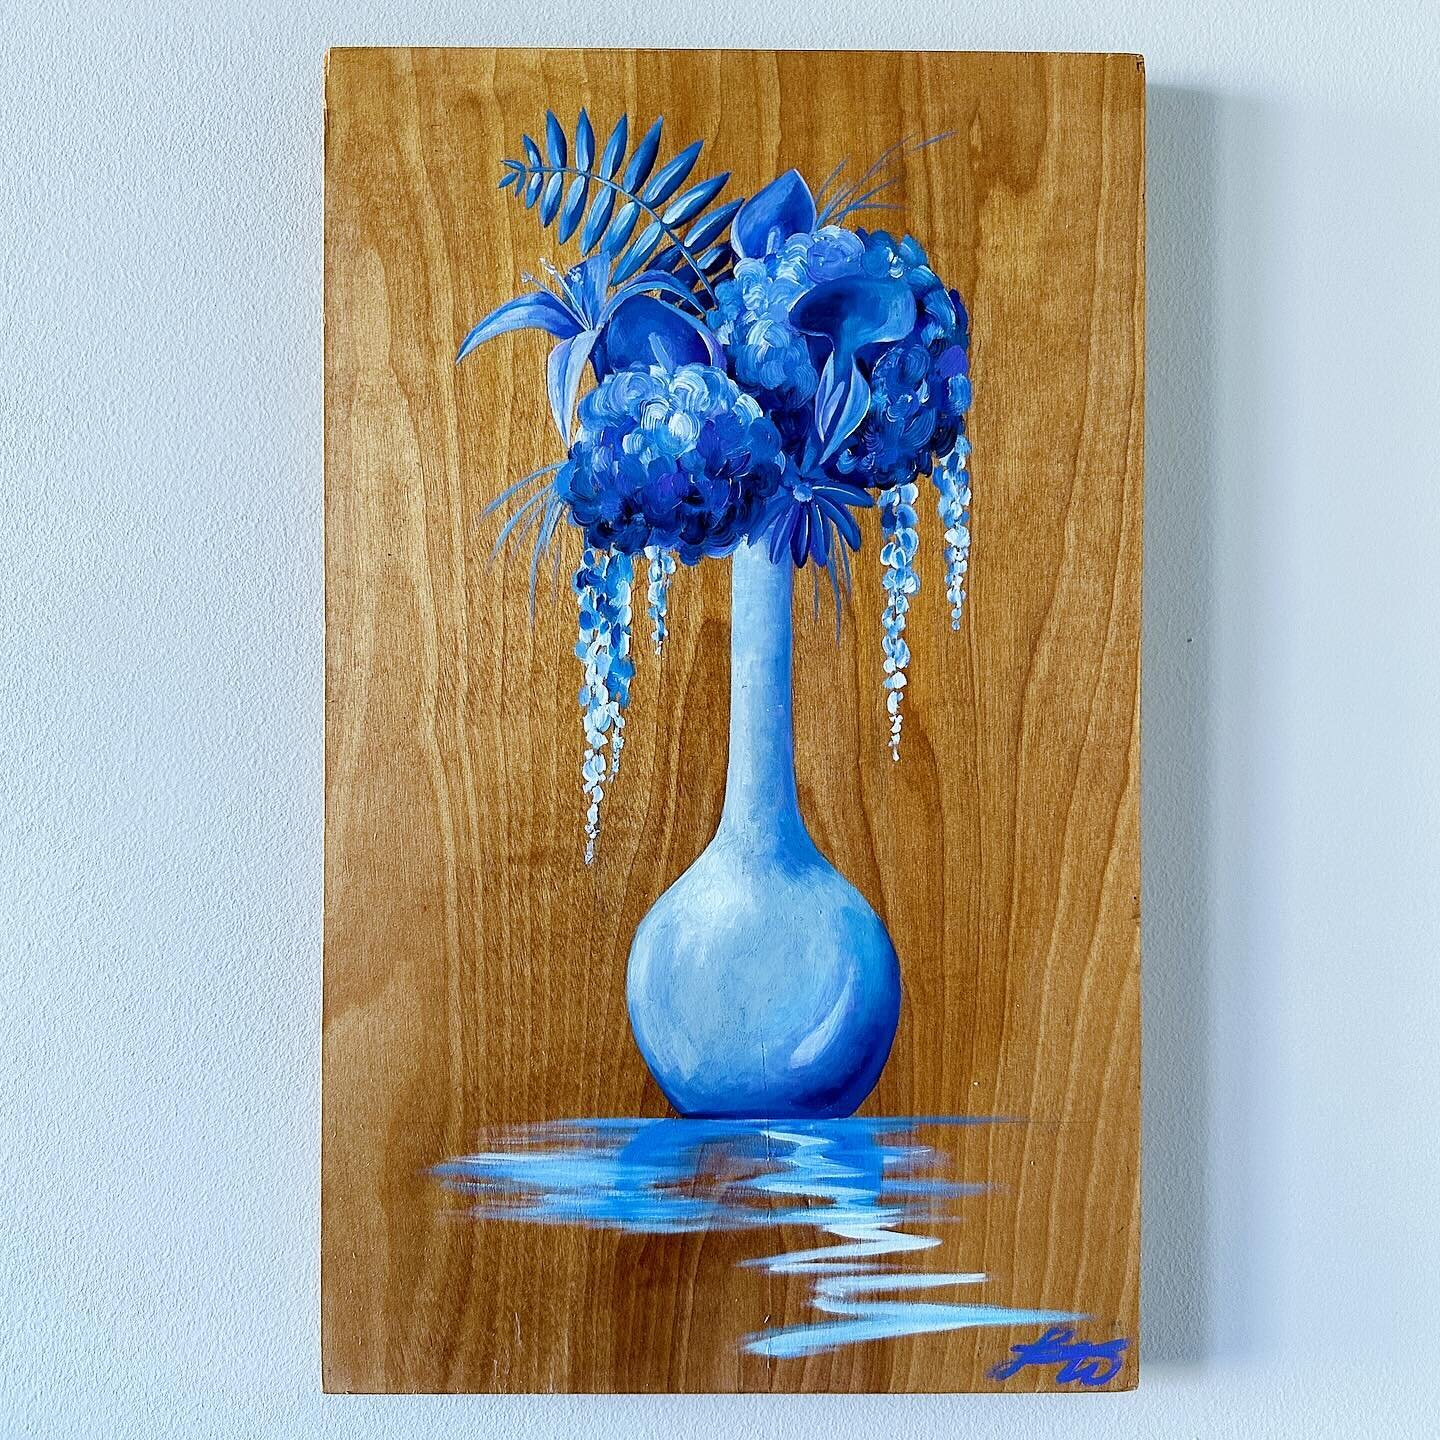 FOR SALE!! Do you need a last minute Valentine&rsquo;s Day gift? Why get flowers when you can get&hellip;. flowers!! To purchase, send me a DM and I can have it shipped out ASAP. 💙💐

&ldquo;Flower Study&rdquo;, 10 x 20, Oil on Wood Panel 
$300, shi